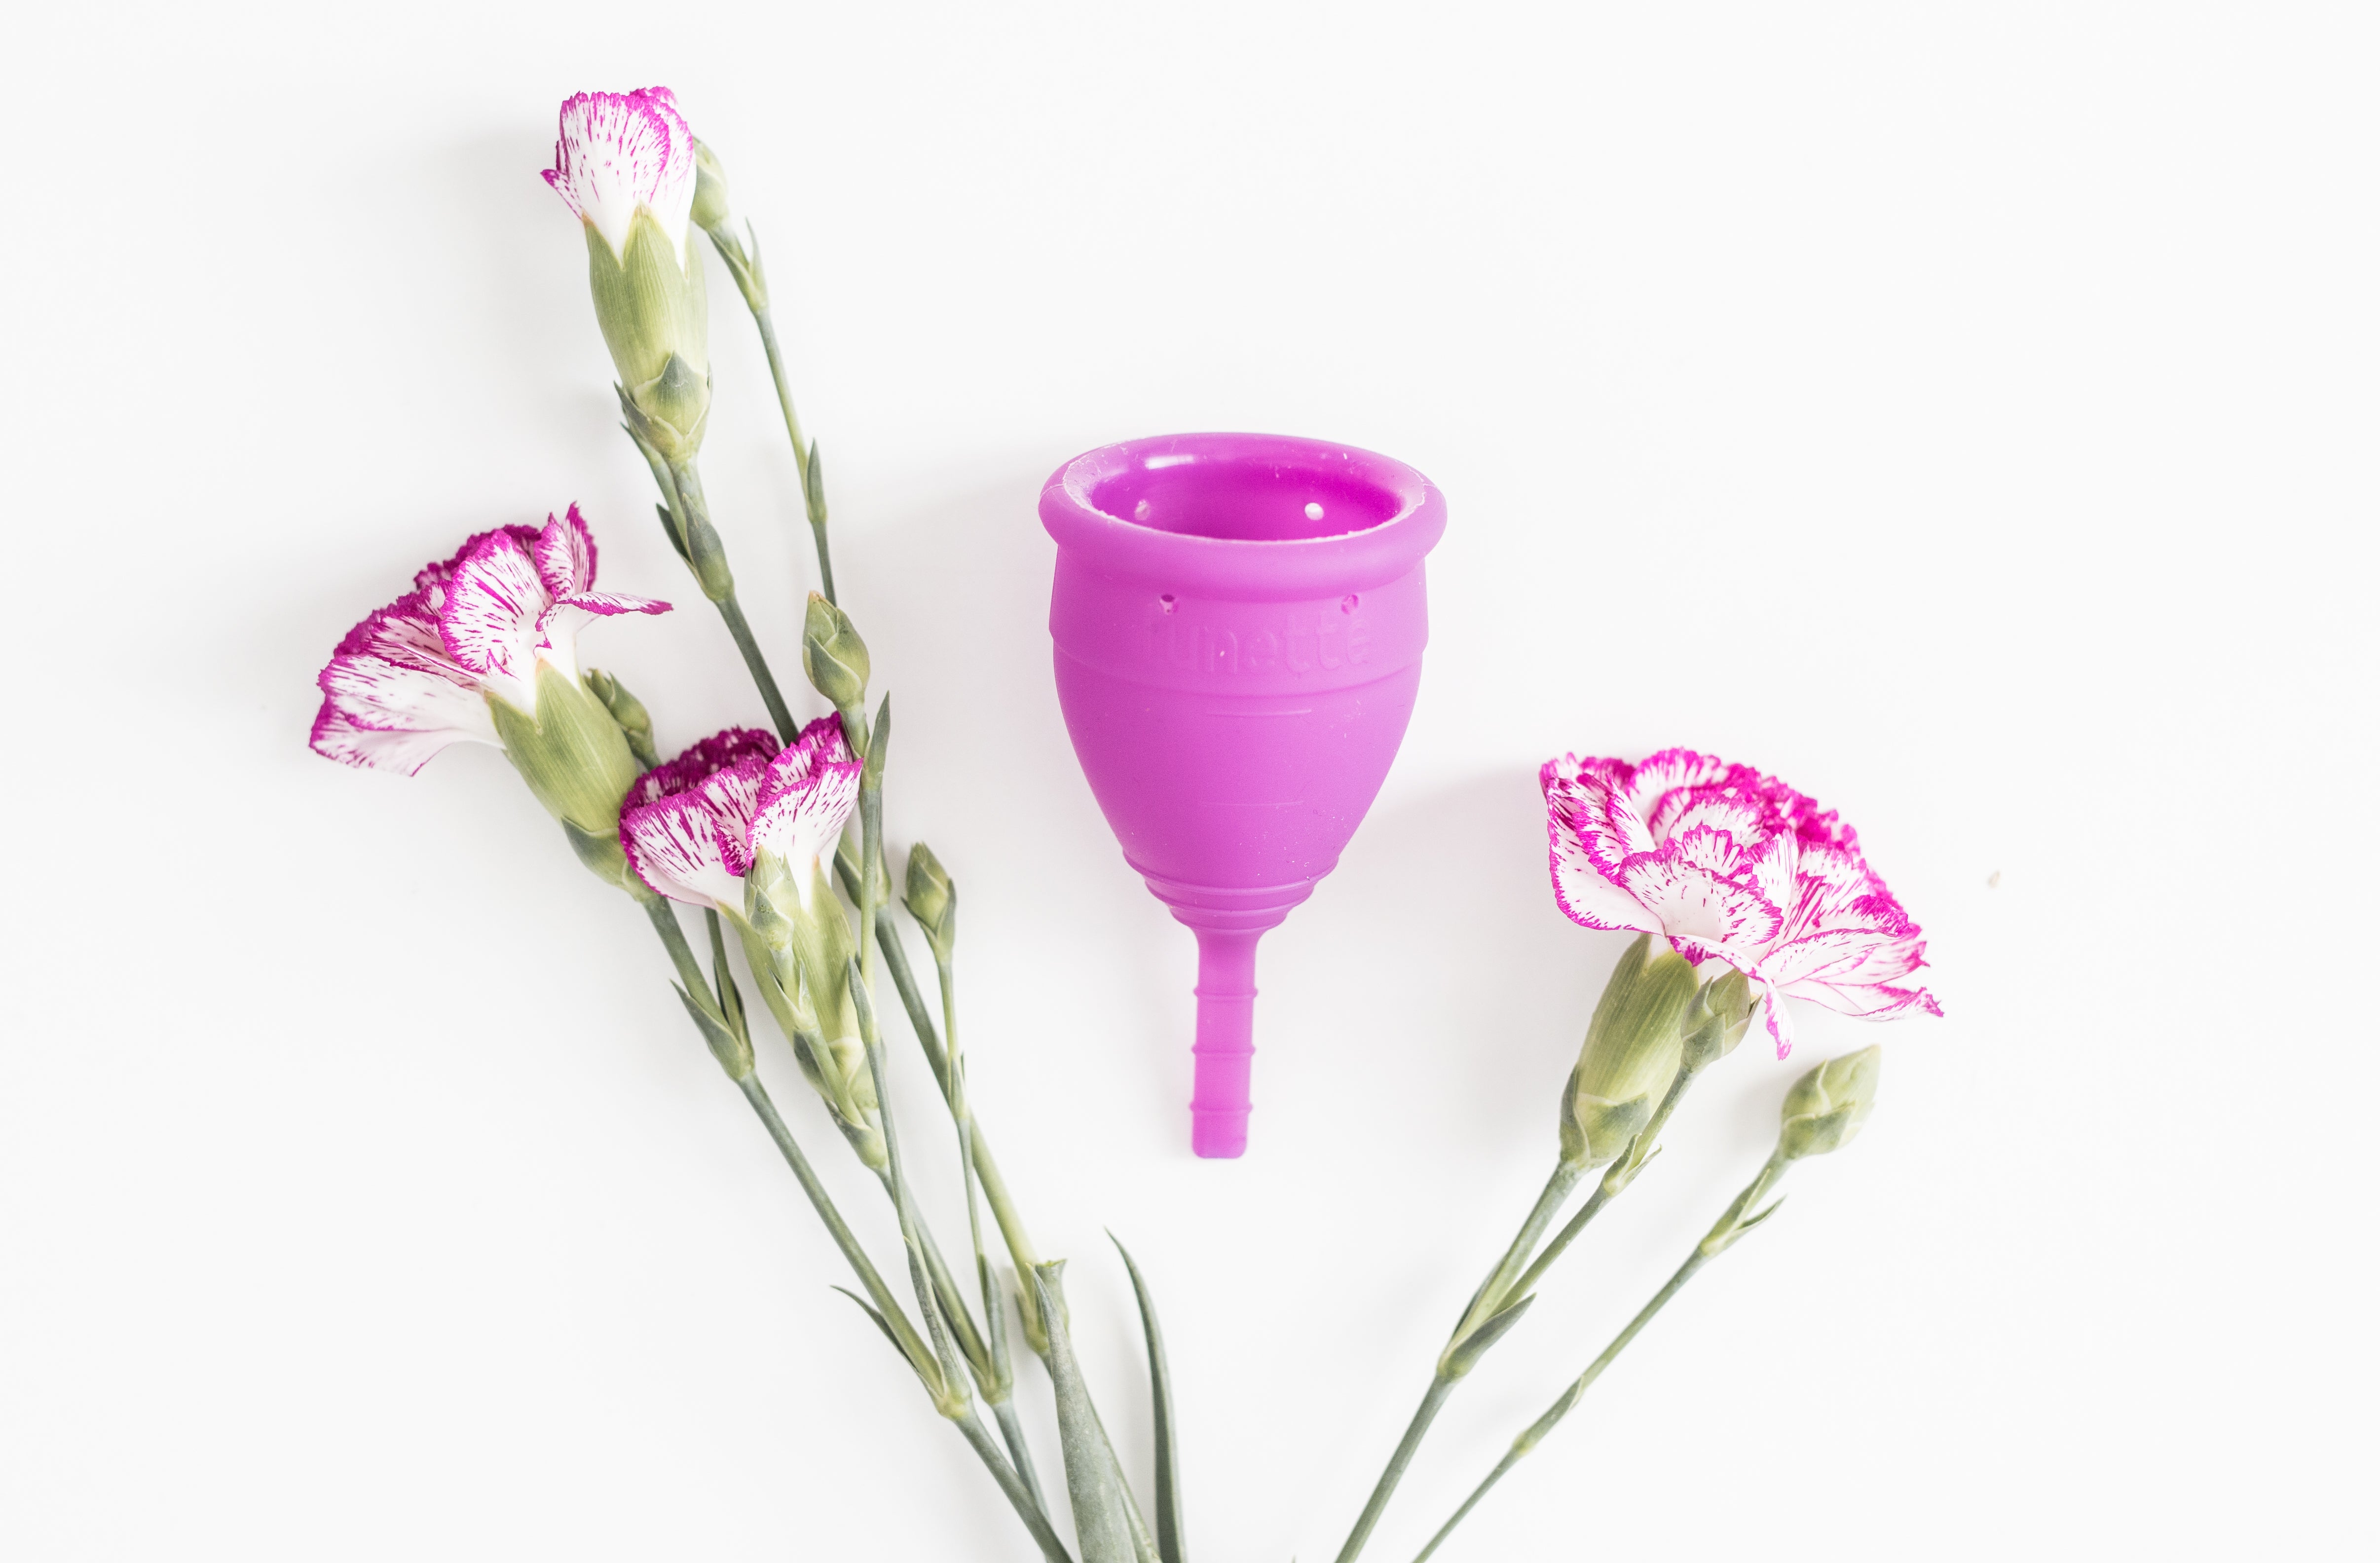 Lunette Menstrual Cup Review by a Wedding Photographer